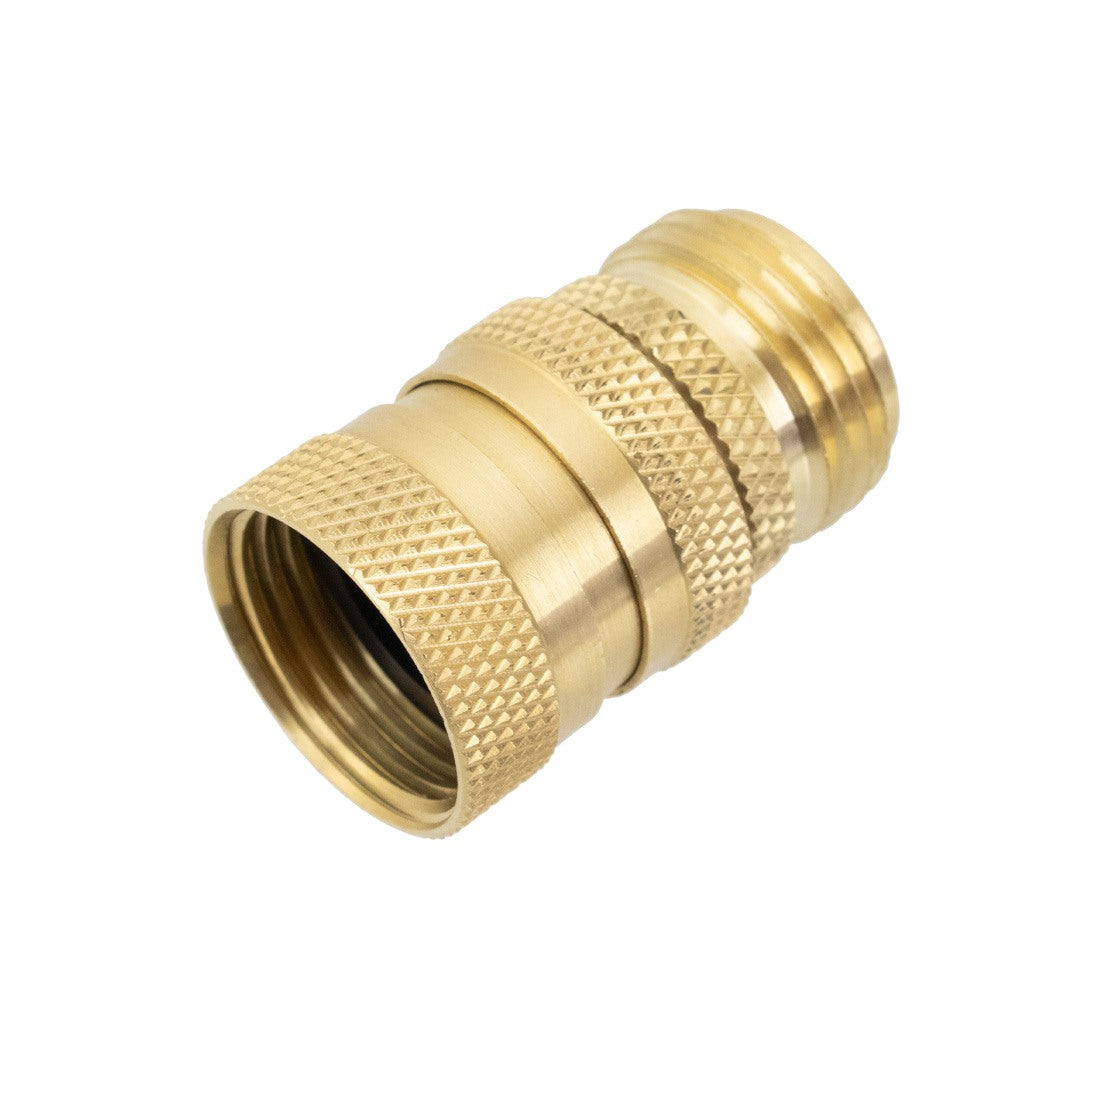 Garden Hose Quick Connect Male and Female Set - Brass - Assembled Tilted Right Top Angle View